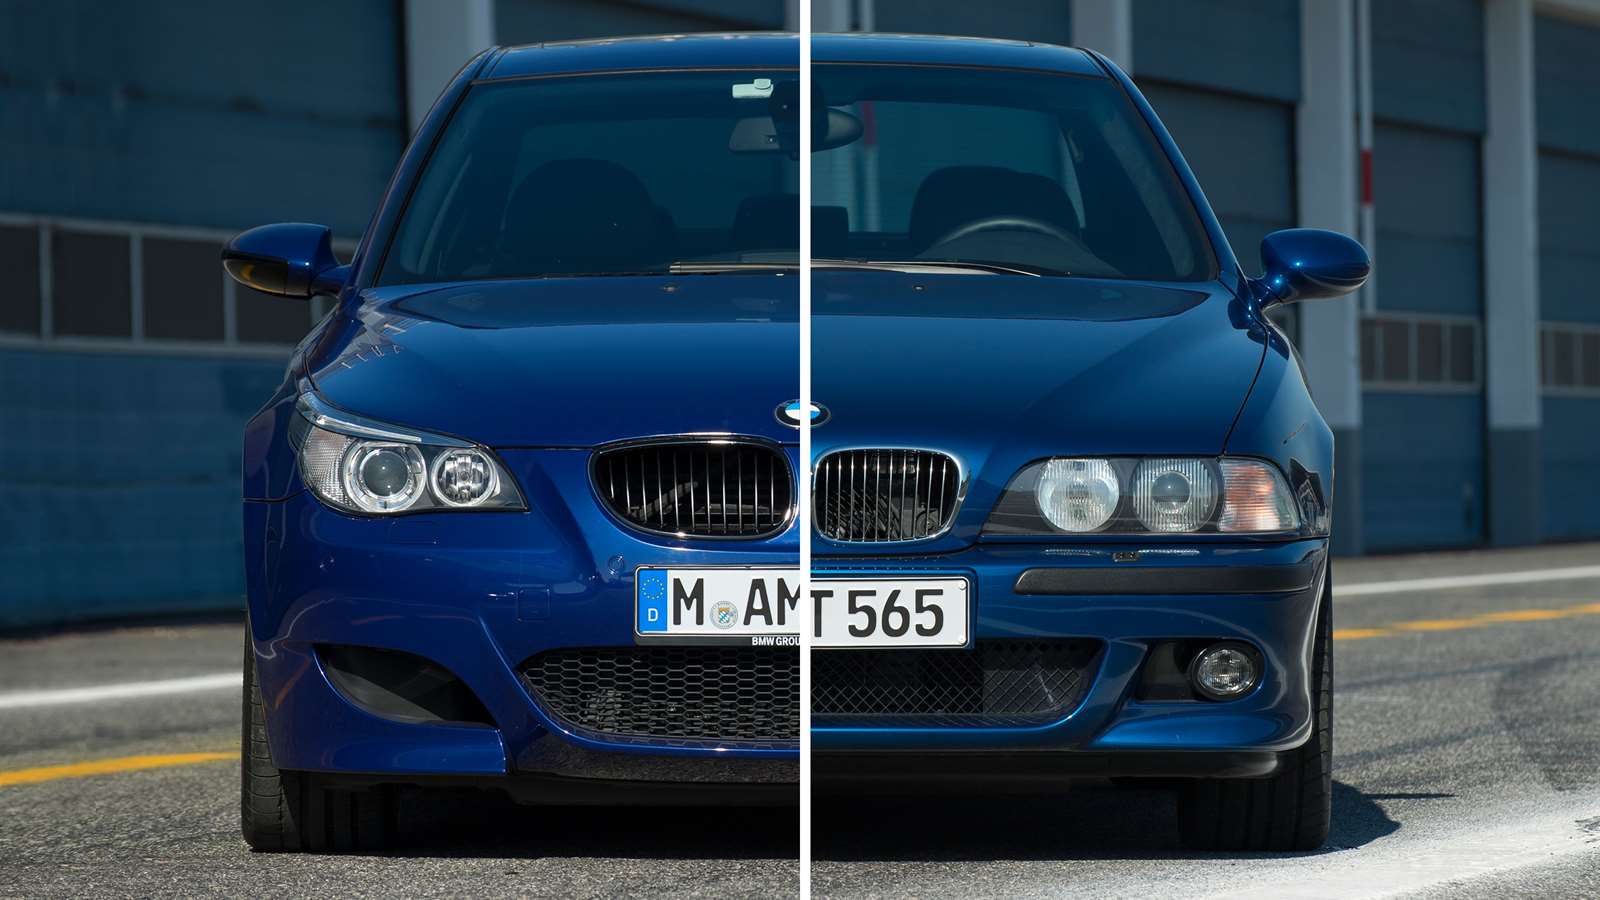 The E60 BMW M5 Is One of the Best M Cars Ever Built, Despite the